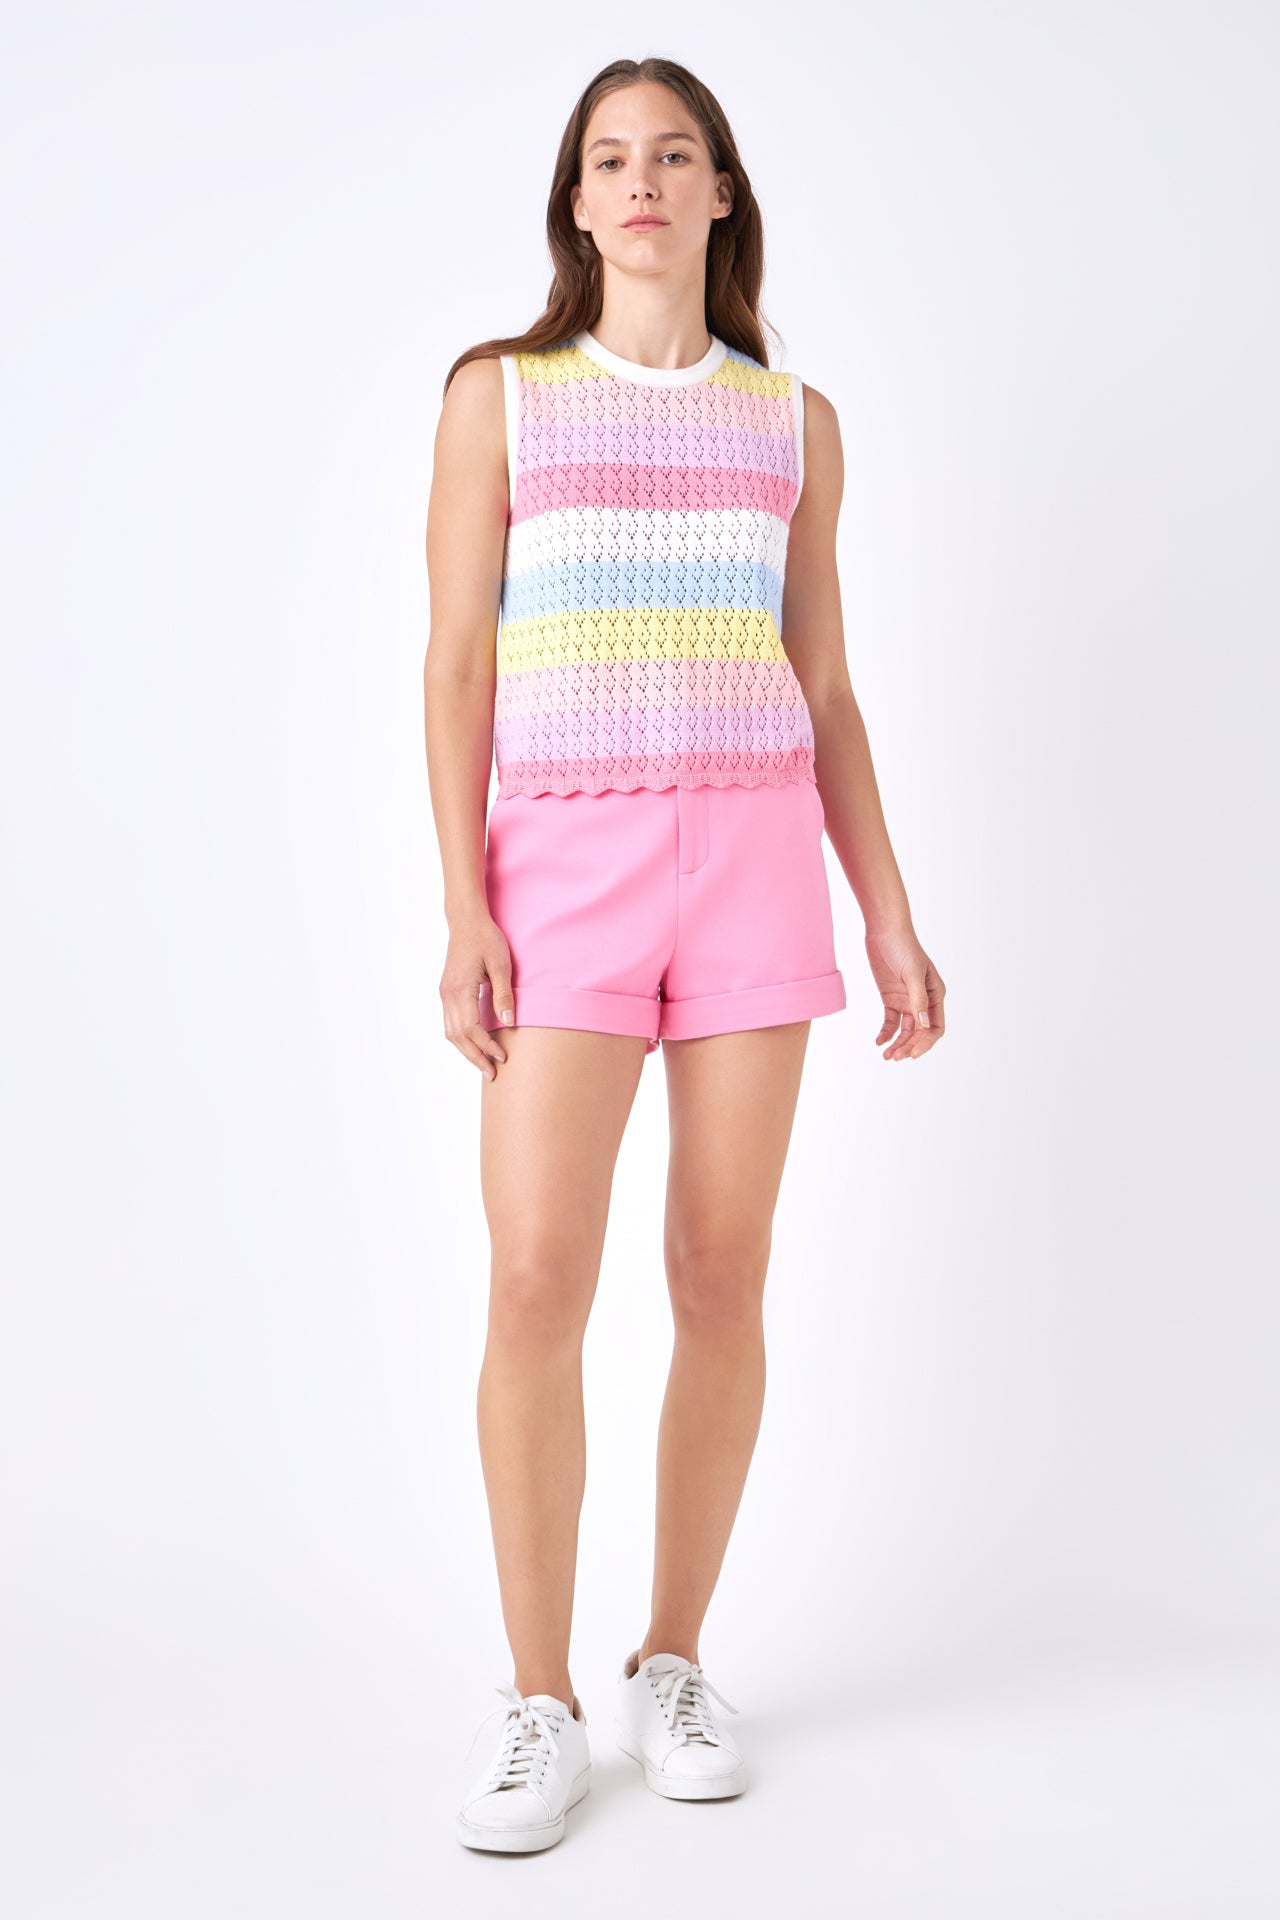 ENGLISH FACTORY - Striped Crochet Top - TOPS available at Objectrare